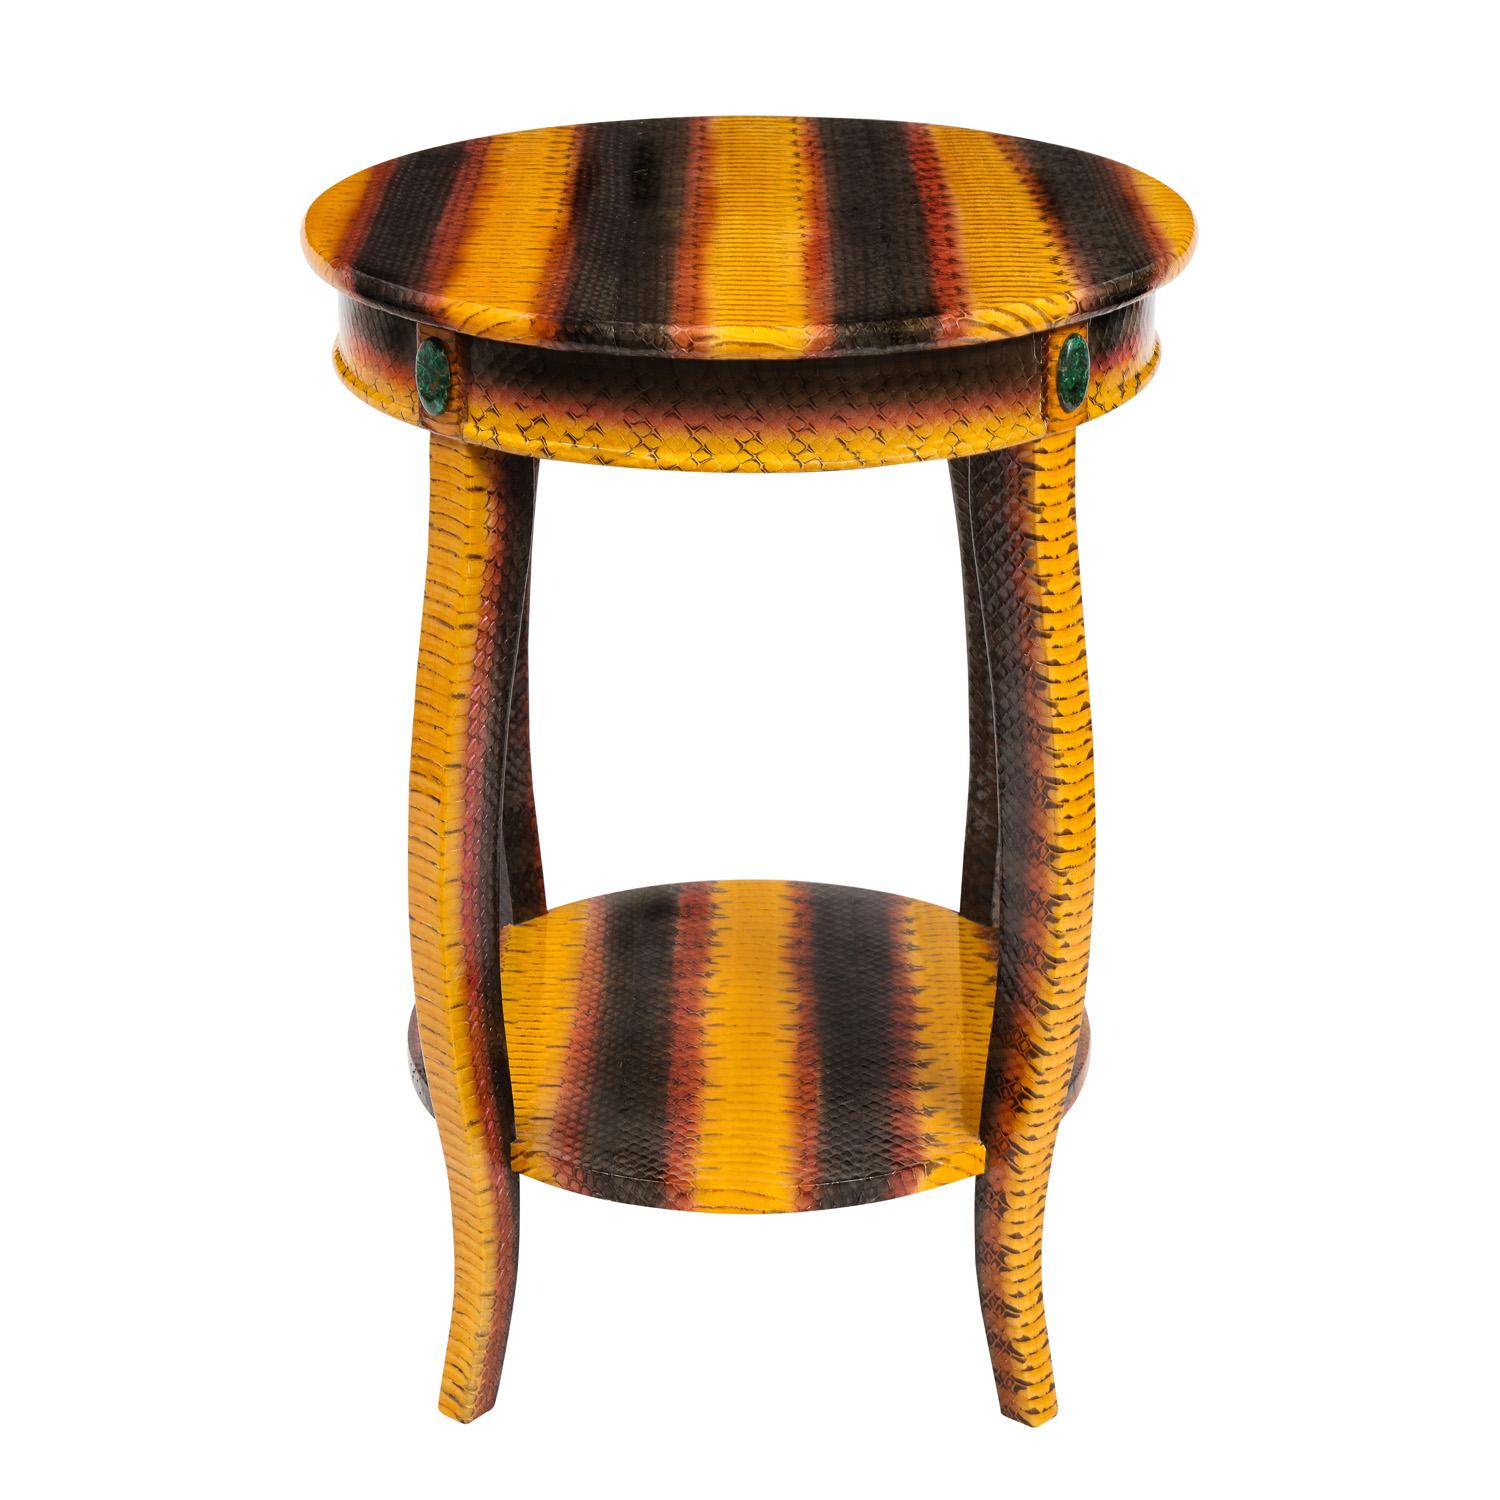 Chic 2-Tier side table with gently curving legs covered in snake skin (pink, yellow and gray) with malachite medallions by Evan Lobel for Lobel Originals, American 2022. Meticulously crafted, this table is a beautiful accent in any room.